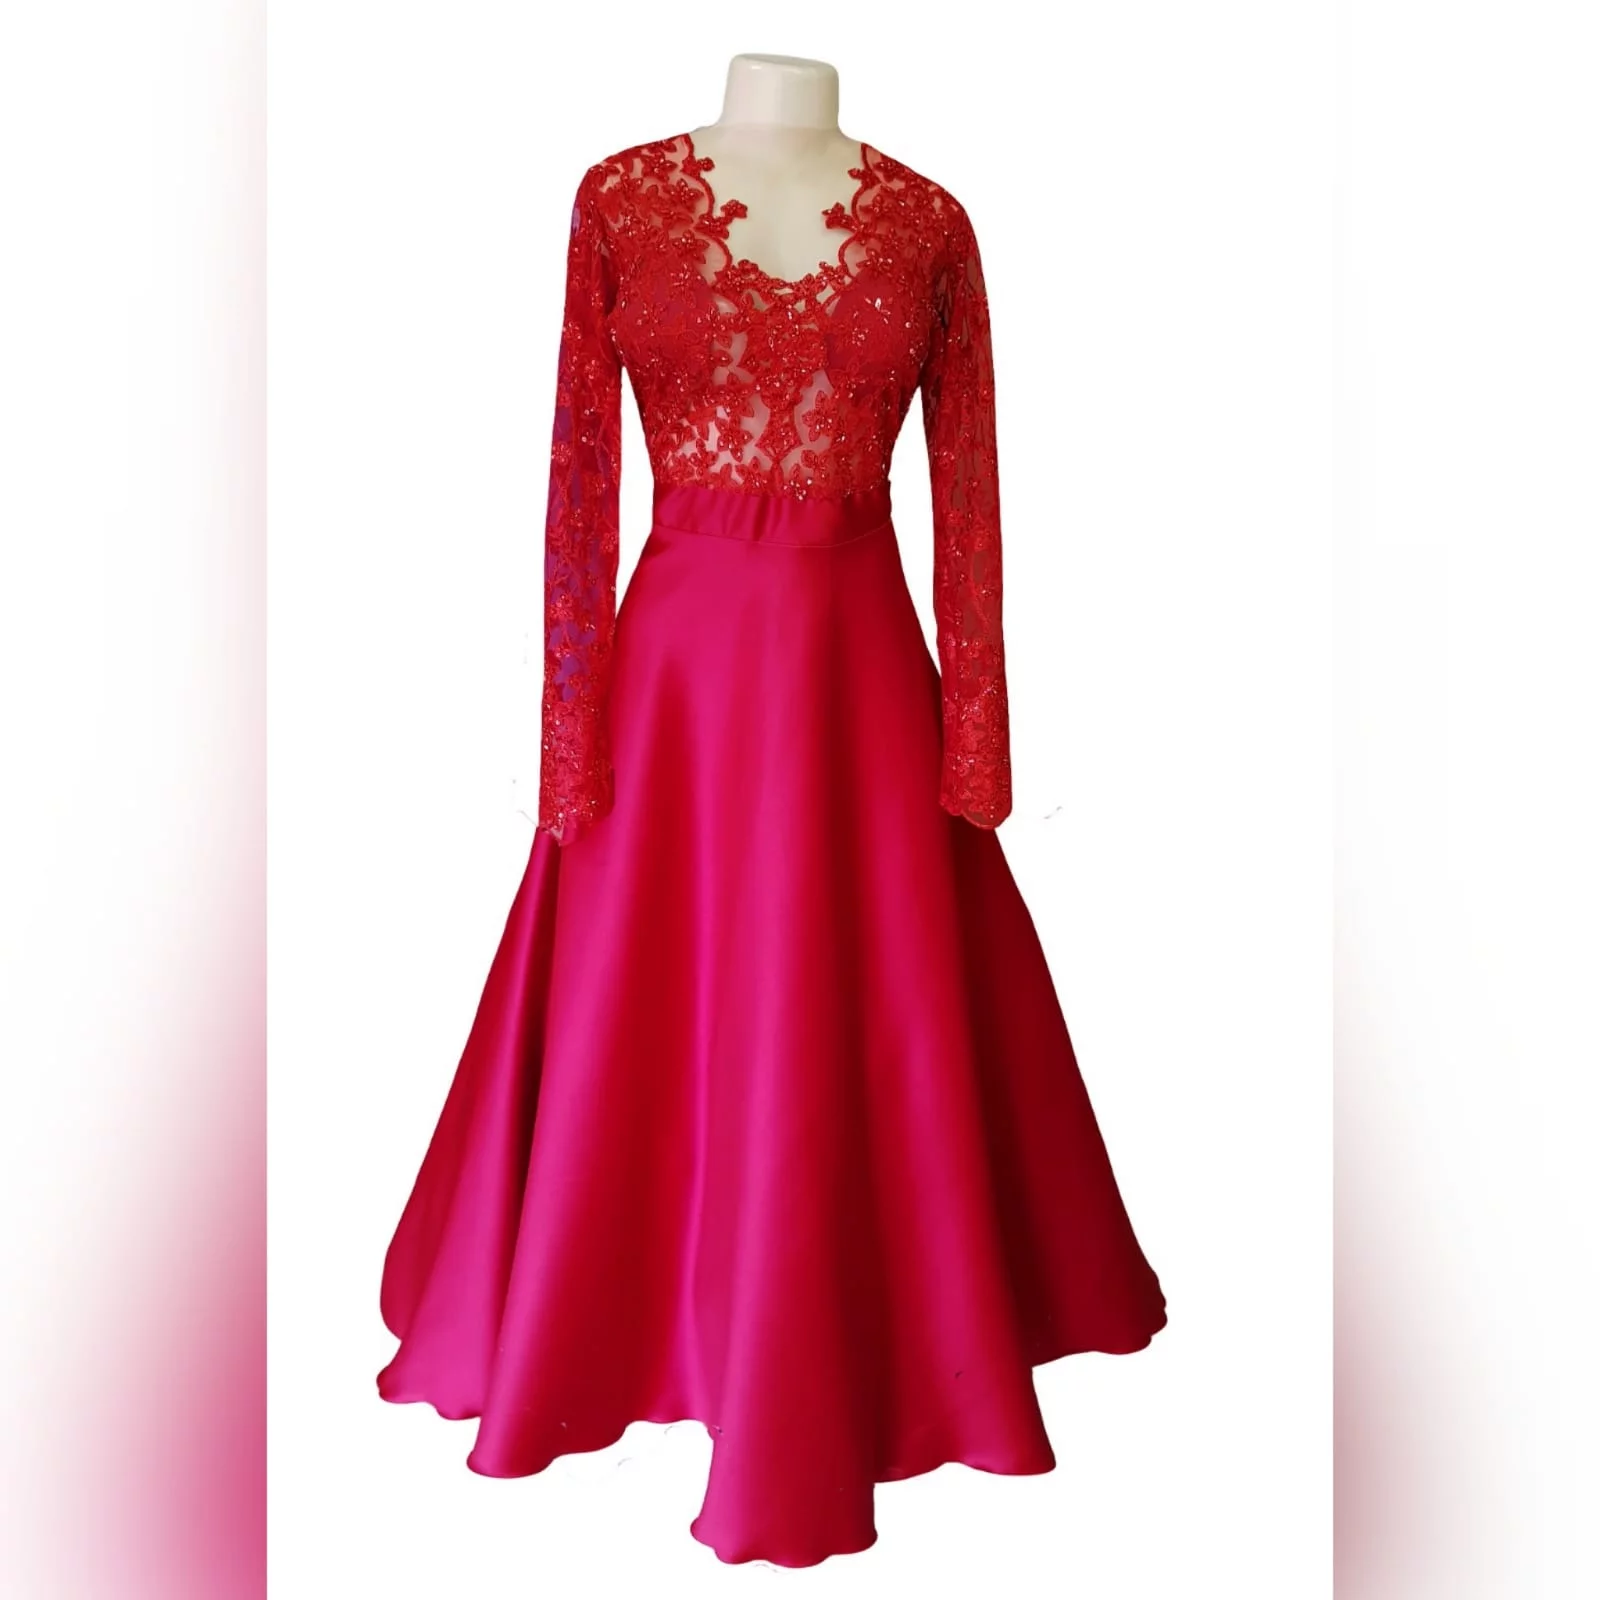 Classic red lace and satin prom dress 10 <blockquote>"don't compromise yourself. You're all you've got. " janis joplin</blockquote> a classic red lace and satin prom dress created for my client's special occasion. With a sheer lace and sleeves bodice with a touch of shine, and a row of buttons to finish off the sensual back design.